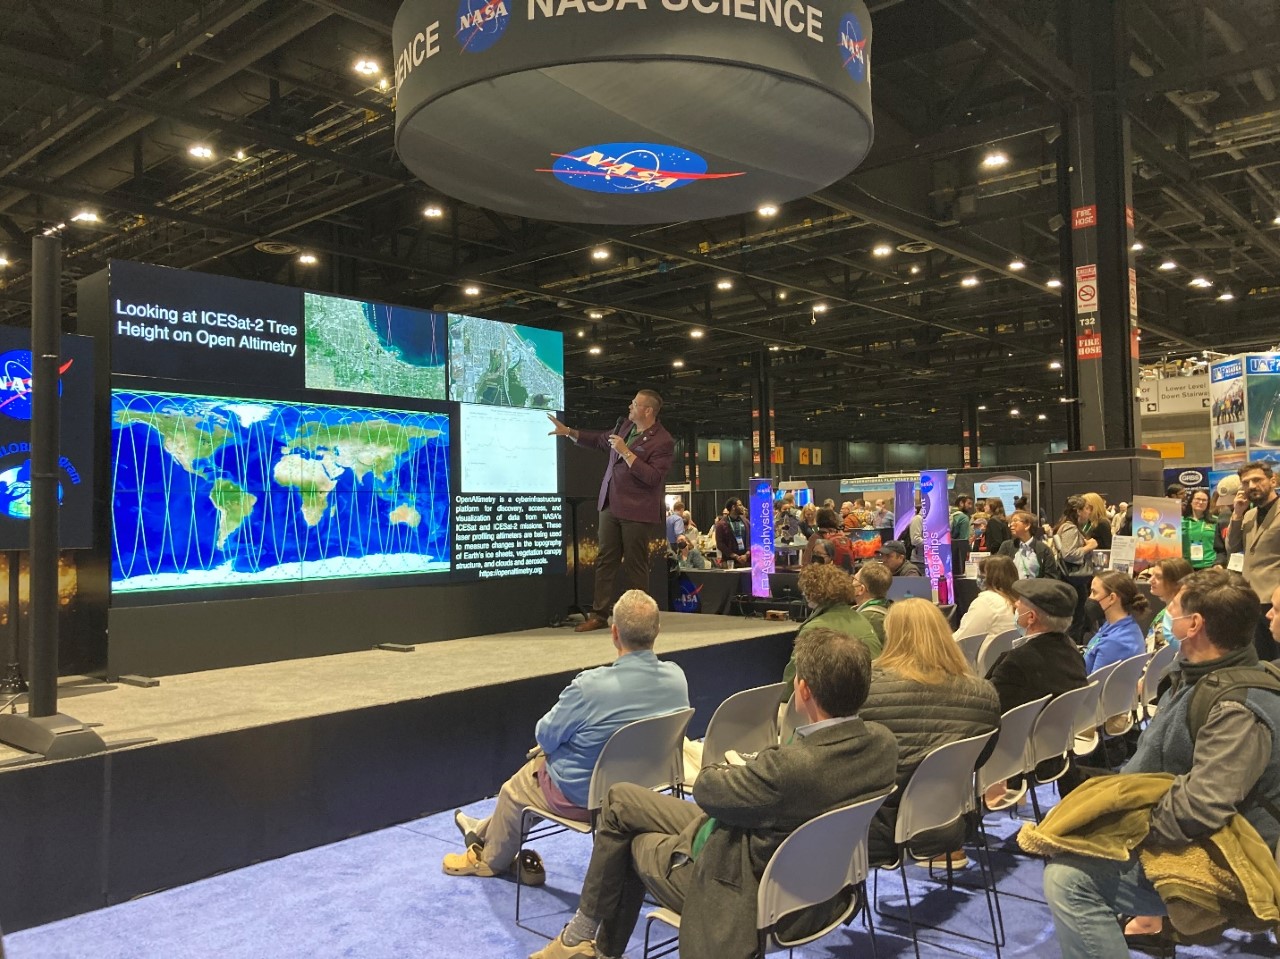 A man points at diagrams on the NASA Hyperwall showing a map from the website OpenAltimetry of the satellite swath locations for ICESat-2 data related to tree height, as well as specific examples of zooming in to get data from a particular place.